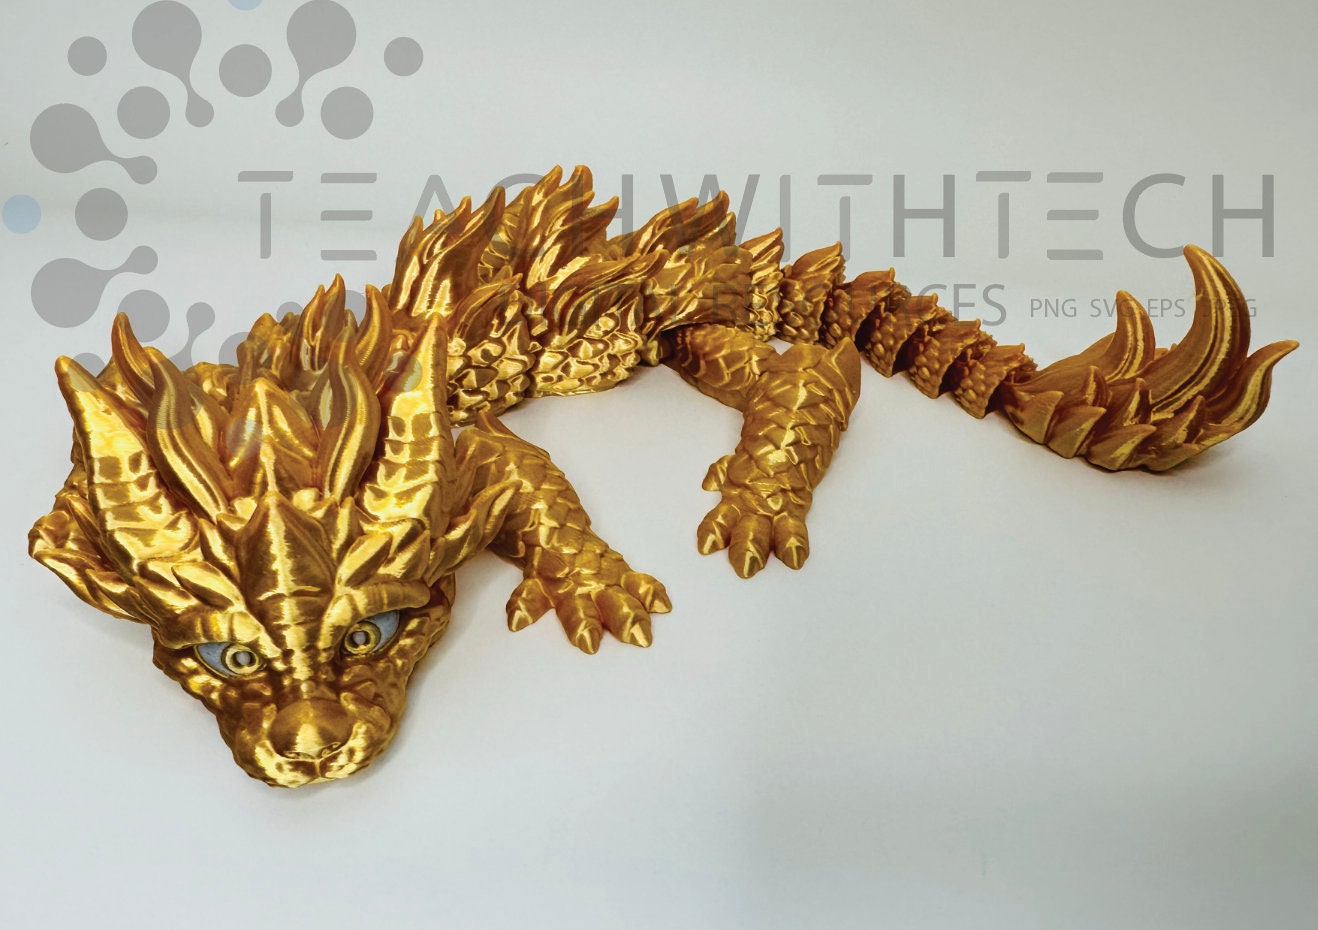 Baby Dragon Articulated Two Color - ADHD Autism Stim Sensory Toy - 3D Printed Articulated Dragon - Cute Dragon Non Crystal